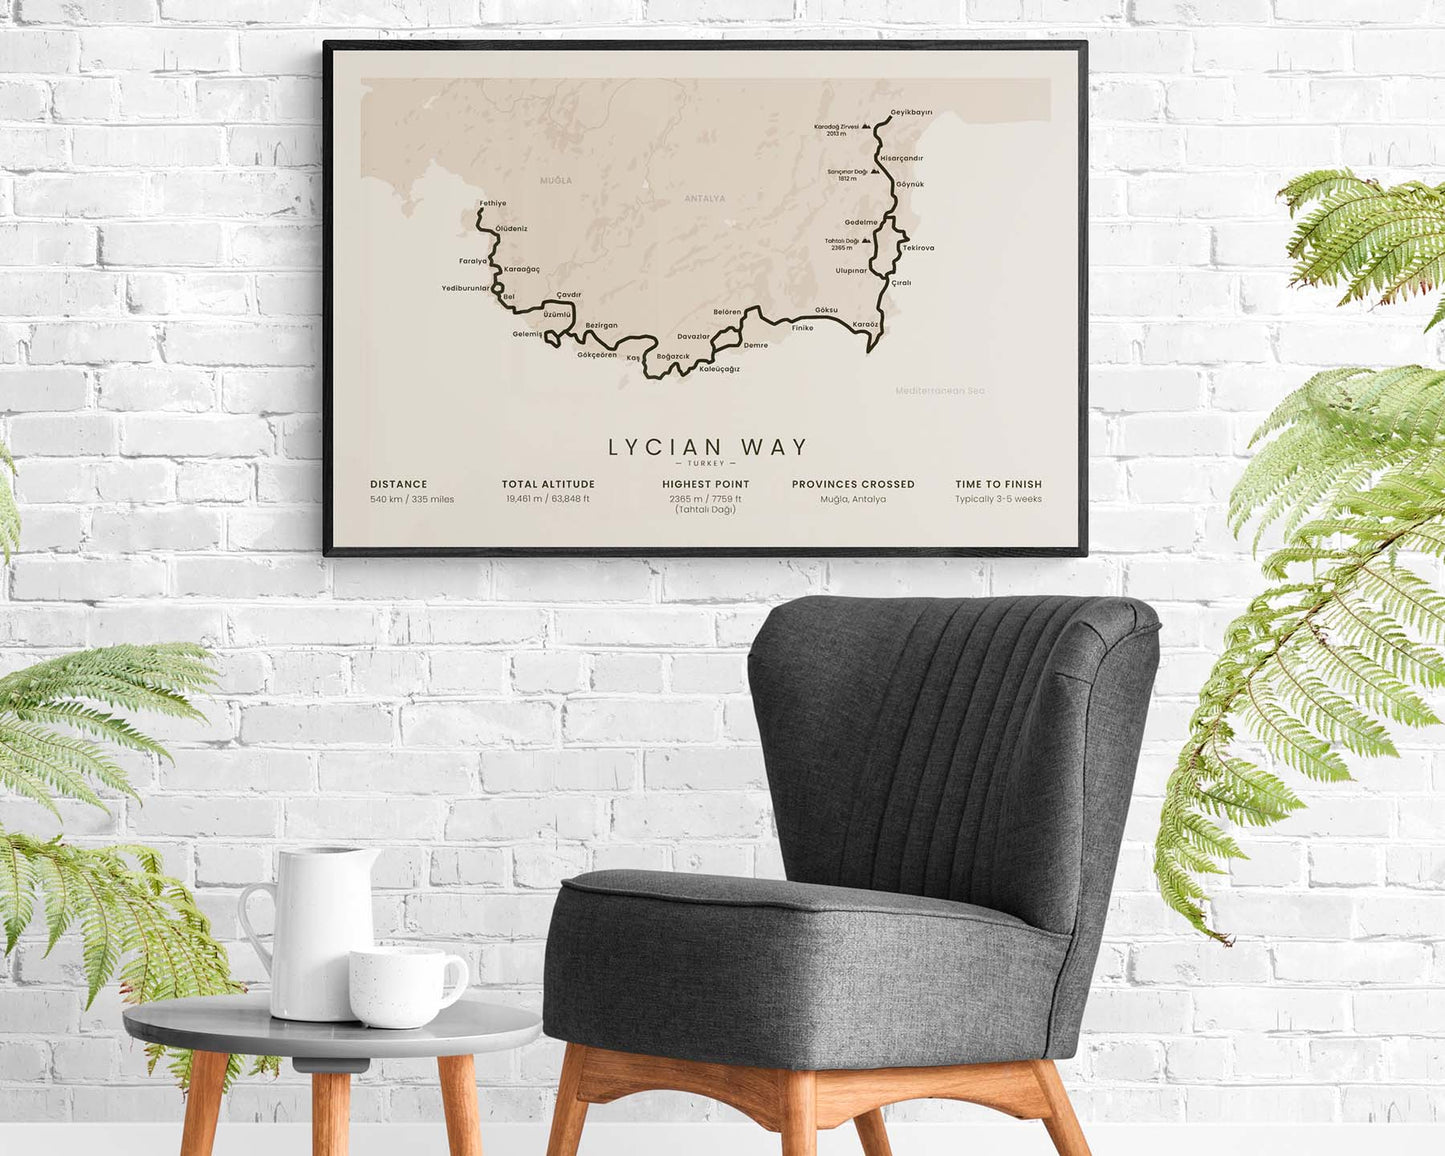 Lycian Way hiking trail in Mediterranean, South Turkey, minimalist map poster with black frame and beige background in living room decor